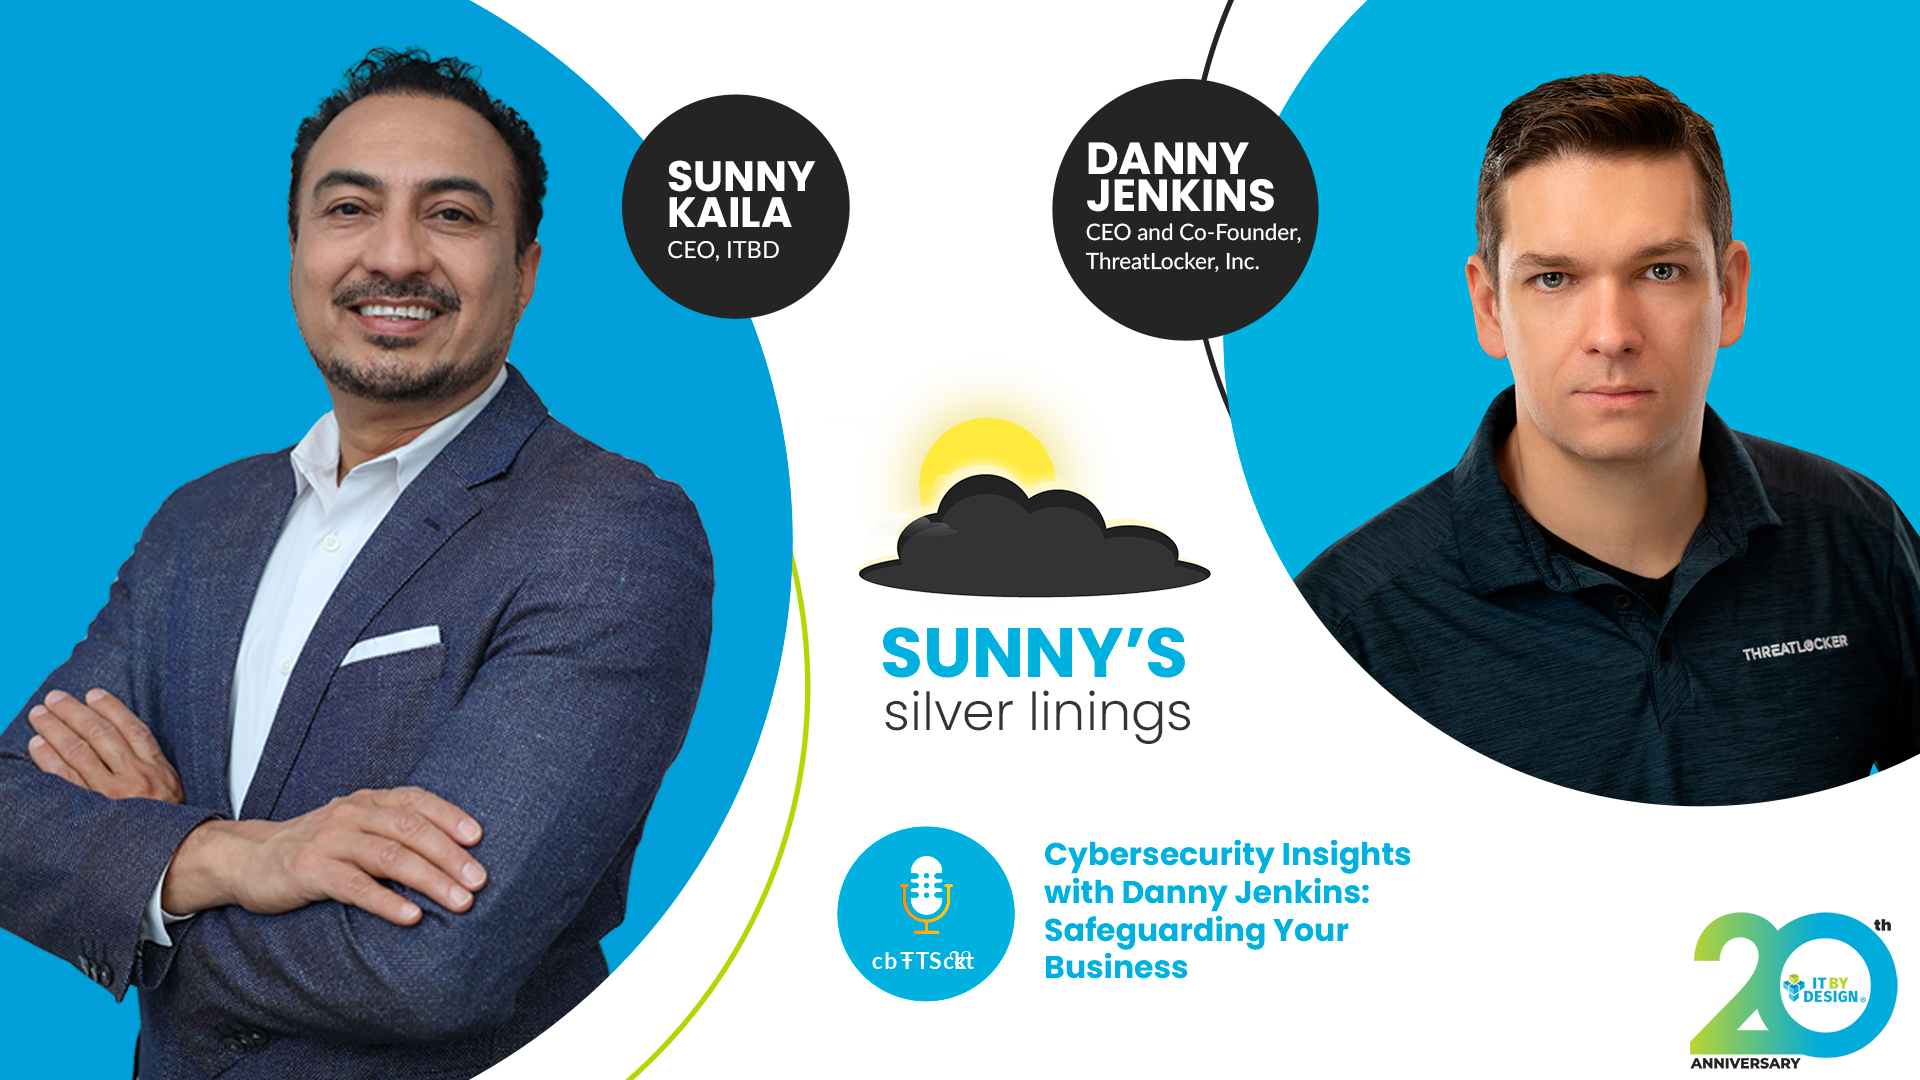 Cybersecurity Insights with Danny Jenkins: Safeguarding Your Business